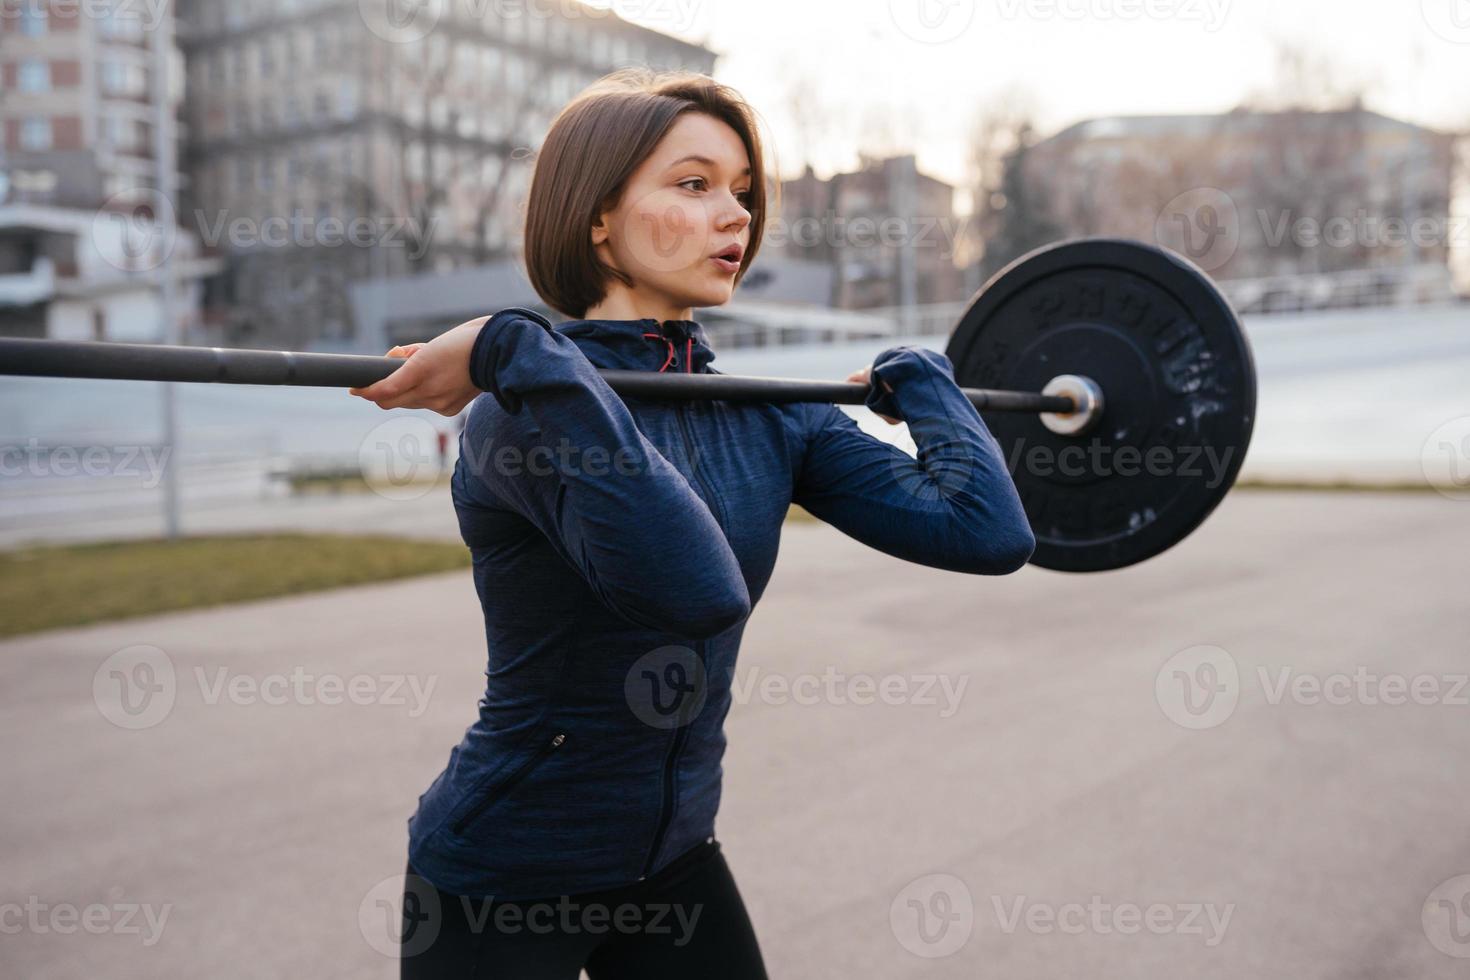 Strong woman exercising with barbell. Sports, fitness concept. photo